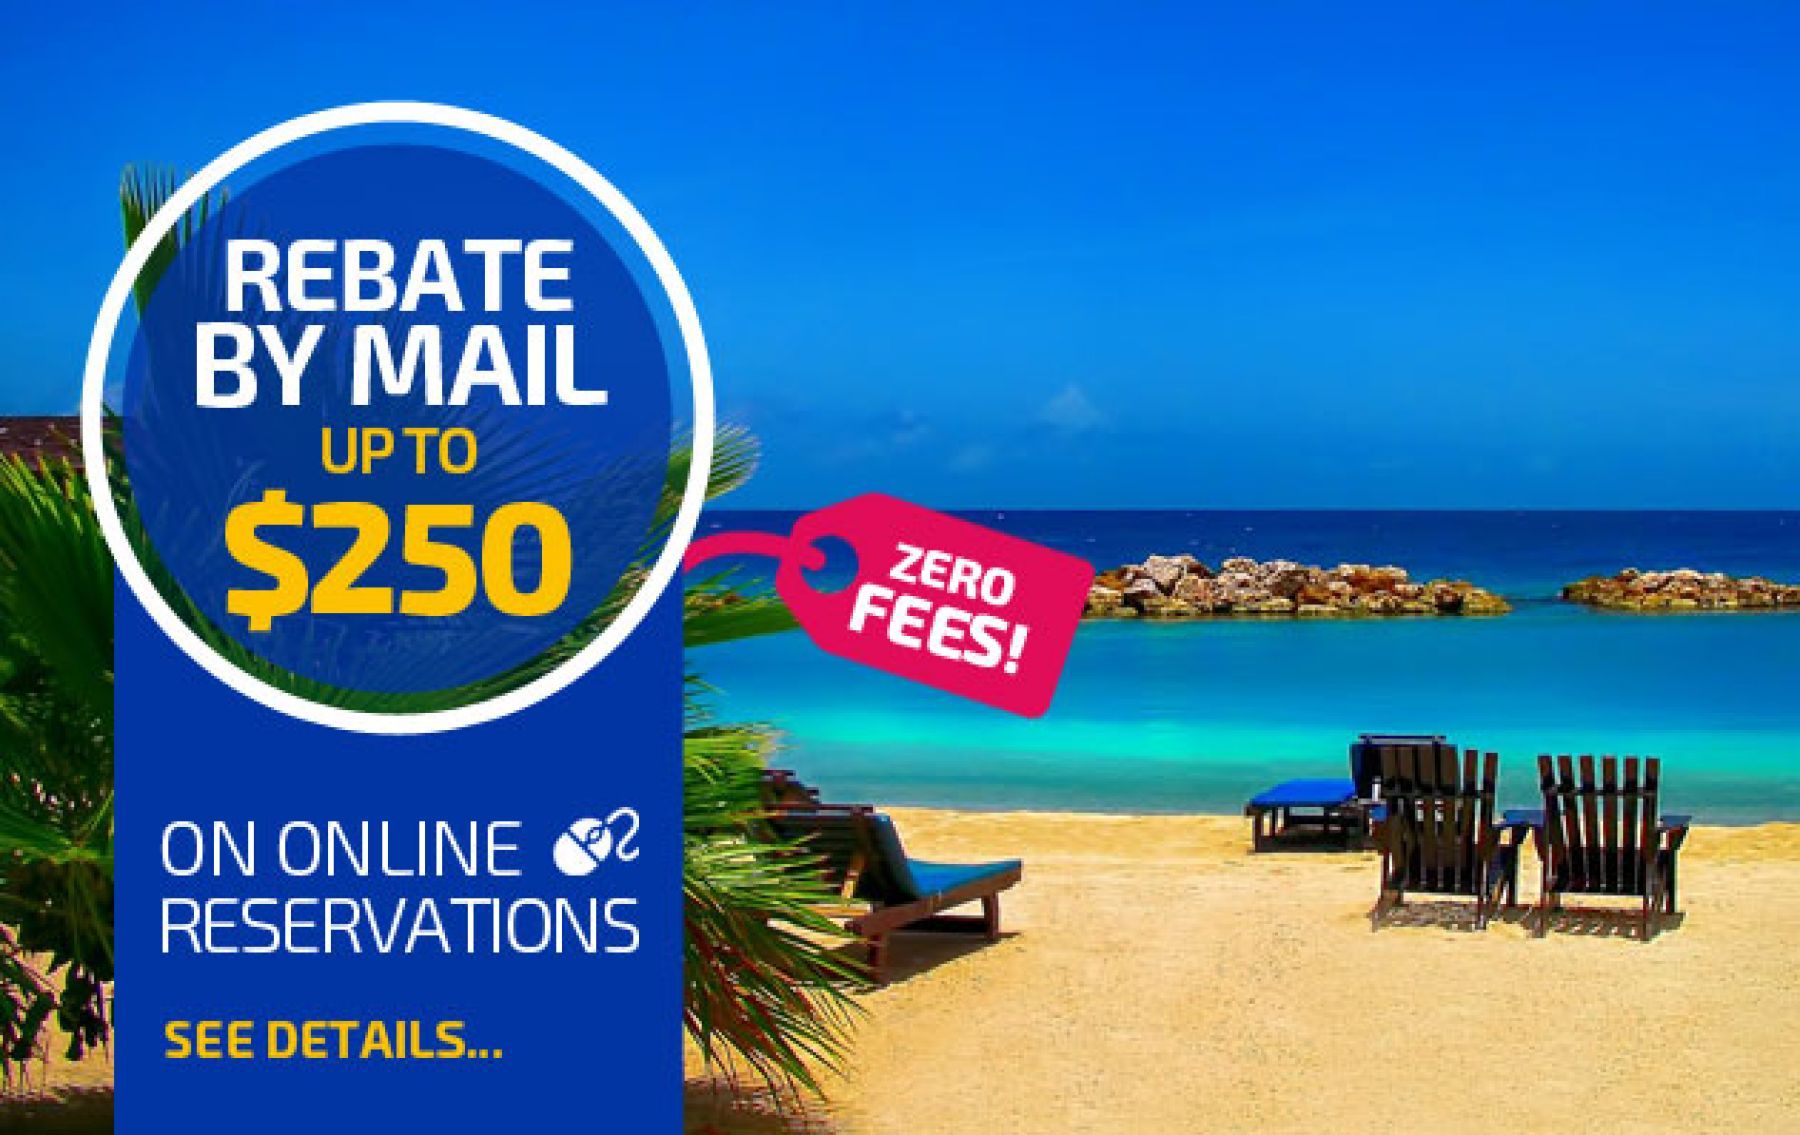 Rebate by Mail up to $250*